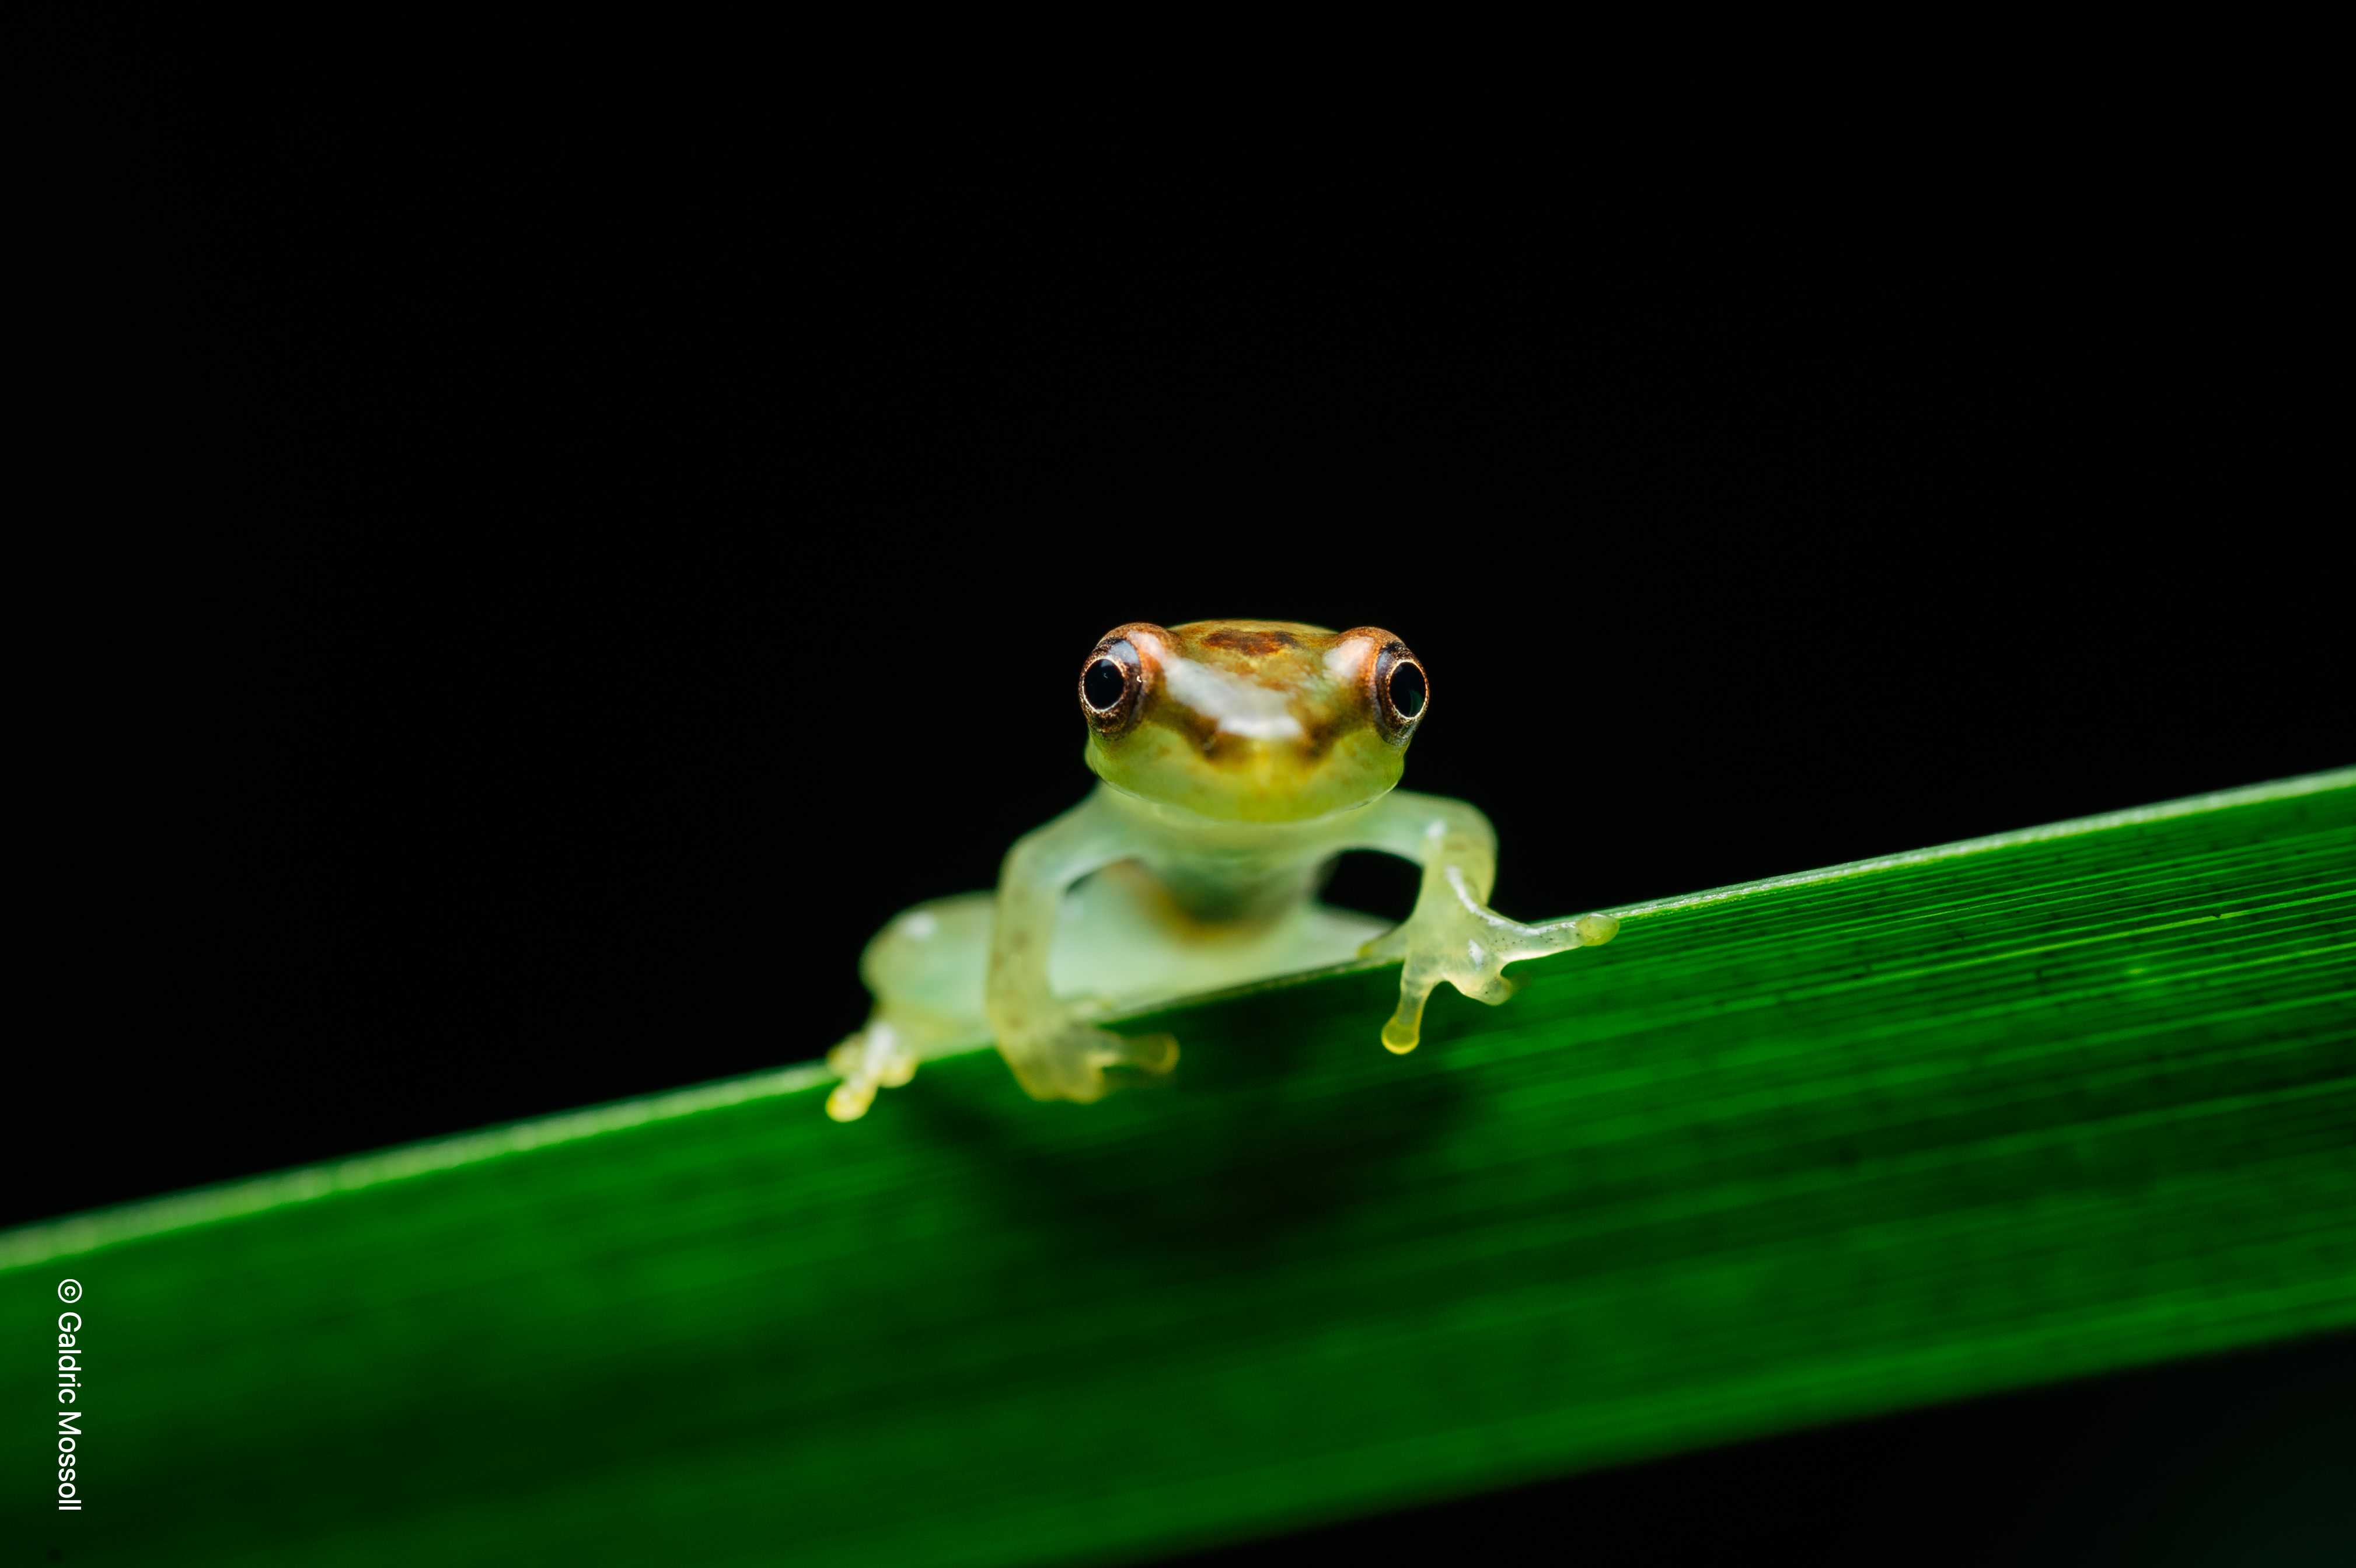 A new tiny green frog with a blue armpit and red spots has been discovered  in Costa Rican nature reserve